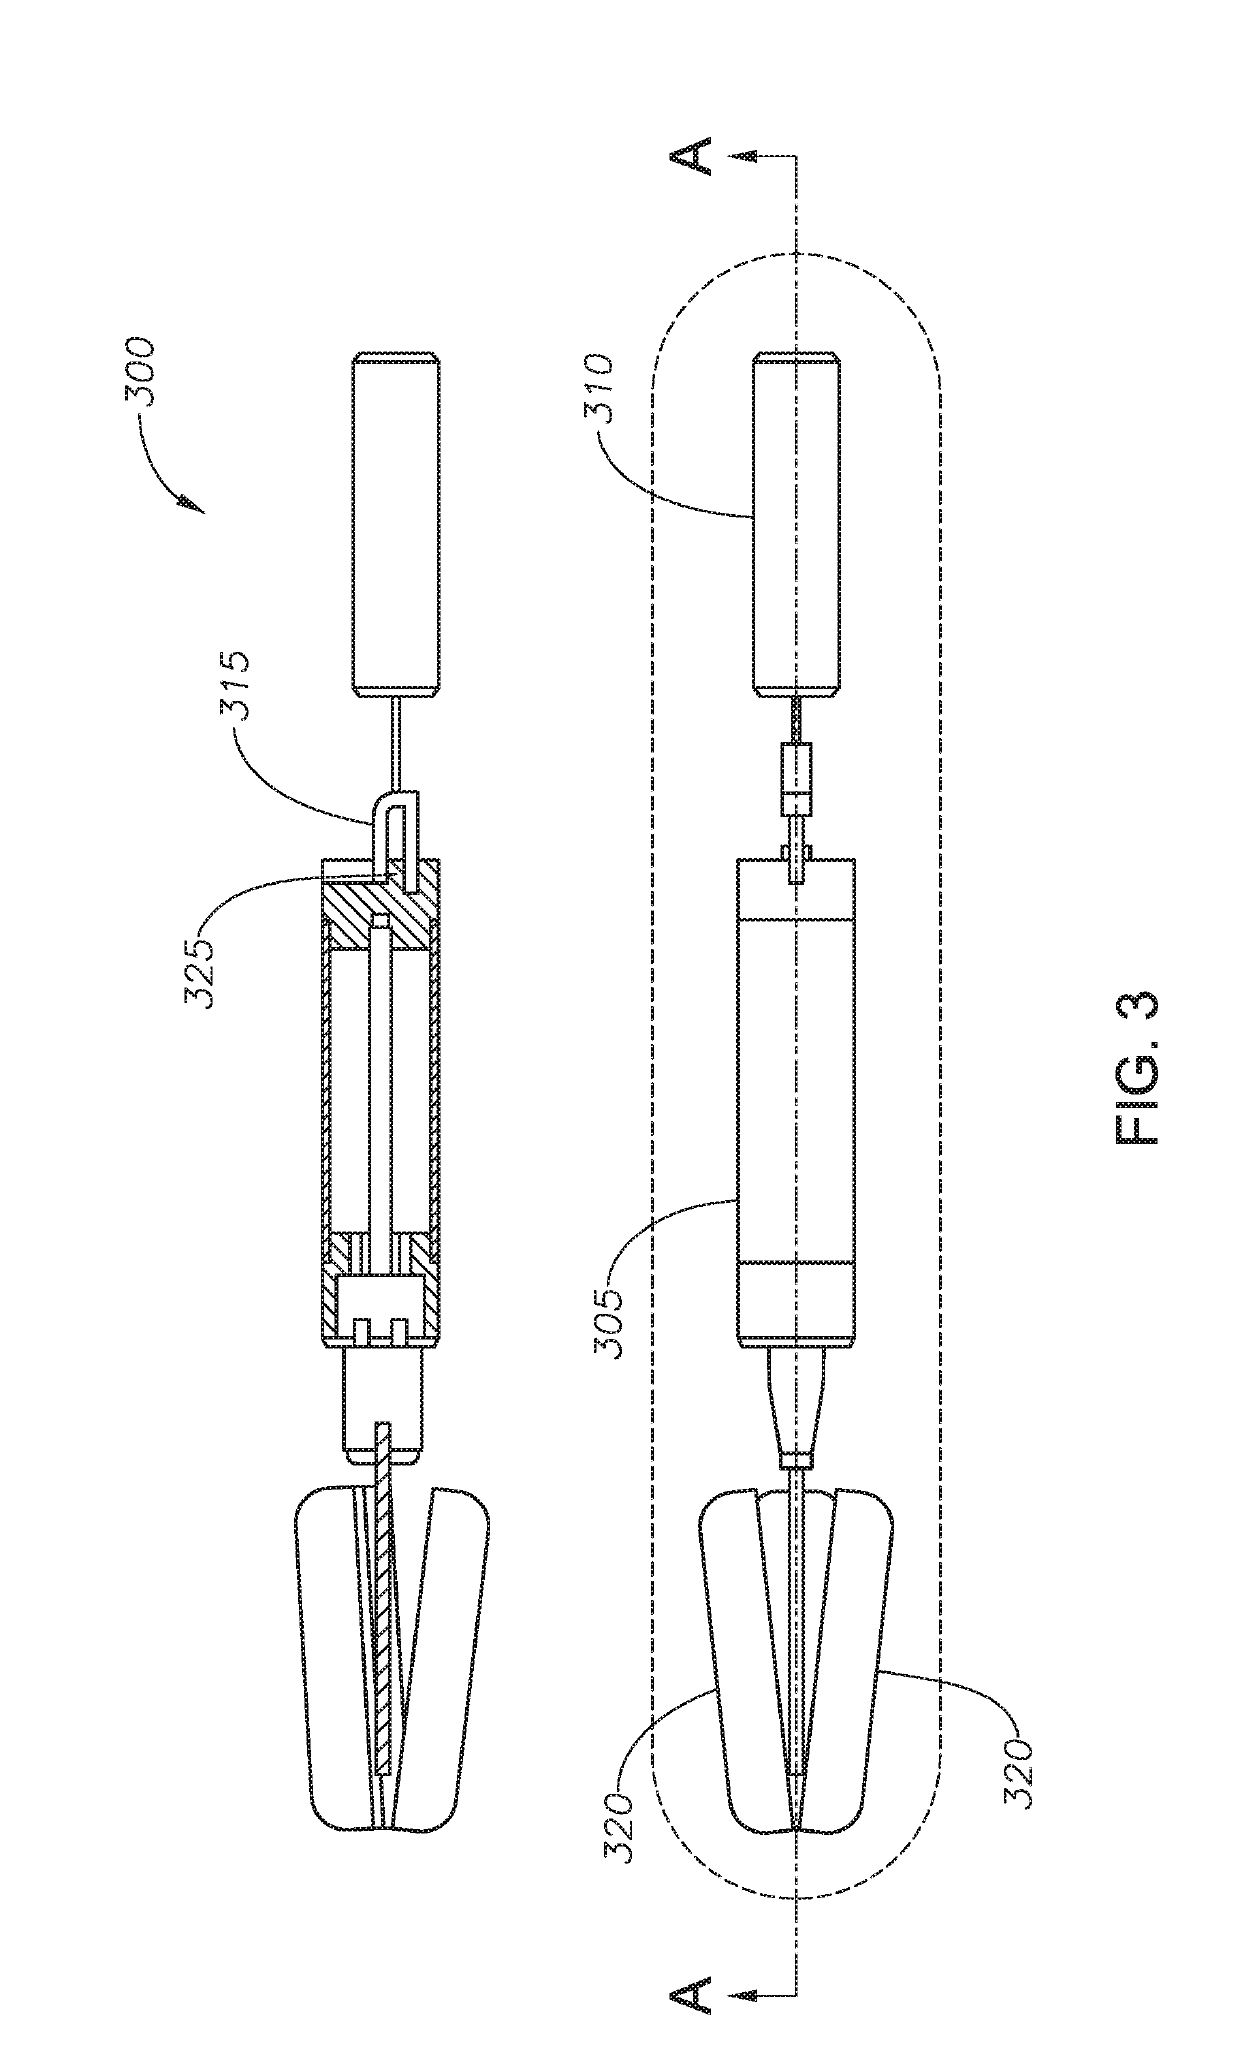 Method and device for obtaining measurements of downhole properties in a subterranean well